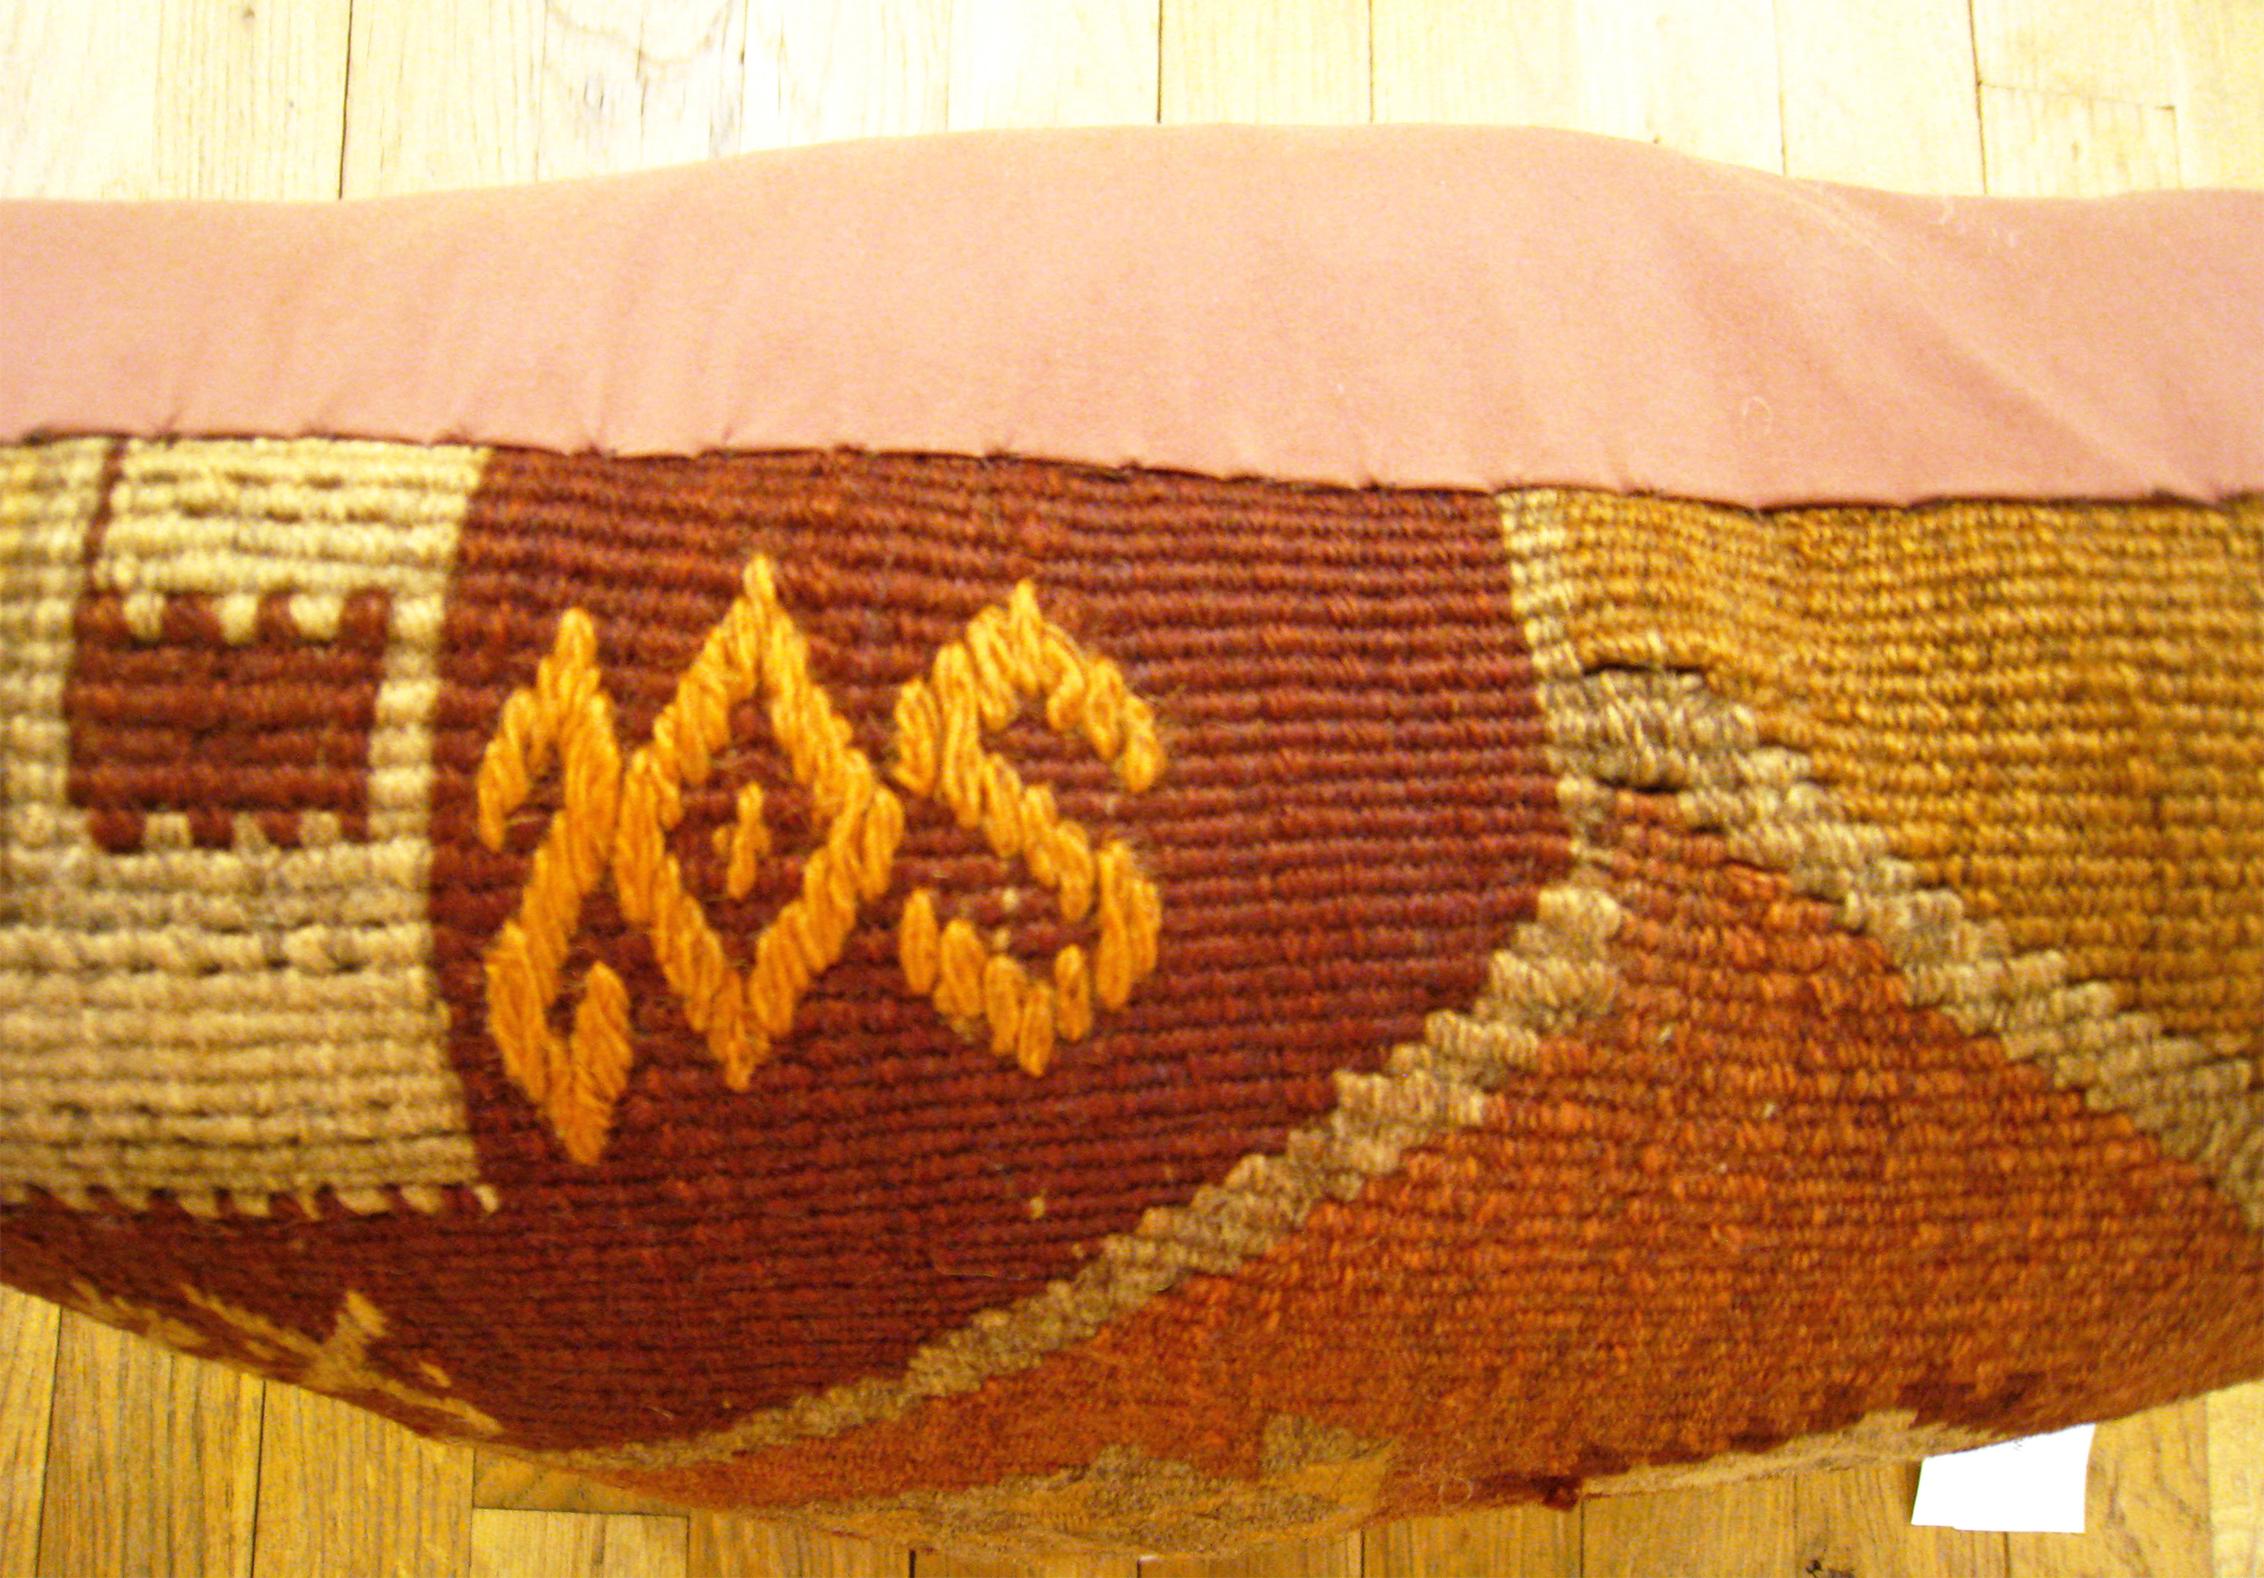 Pair of Decorative Vintage Turkish Kilim Rug Pillows with Geometric Abstracts For Sale 4